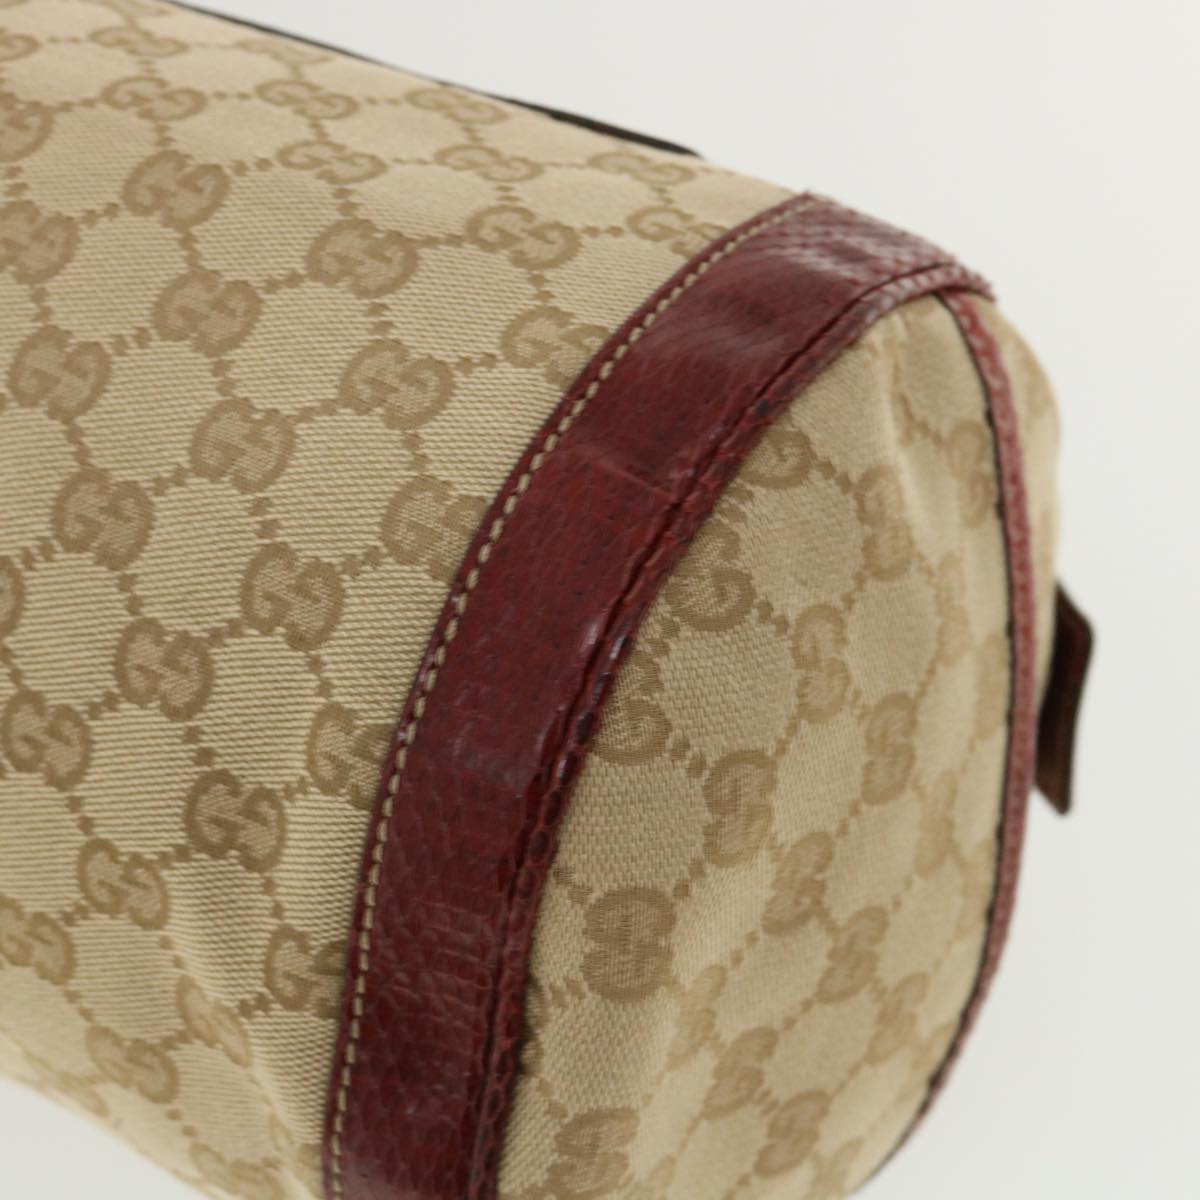 GUCCI GG Canvas Hand Bag Snake skin Beige Red 189825002122 Auth am3163